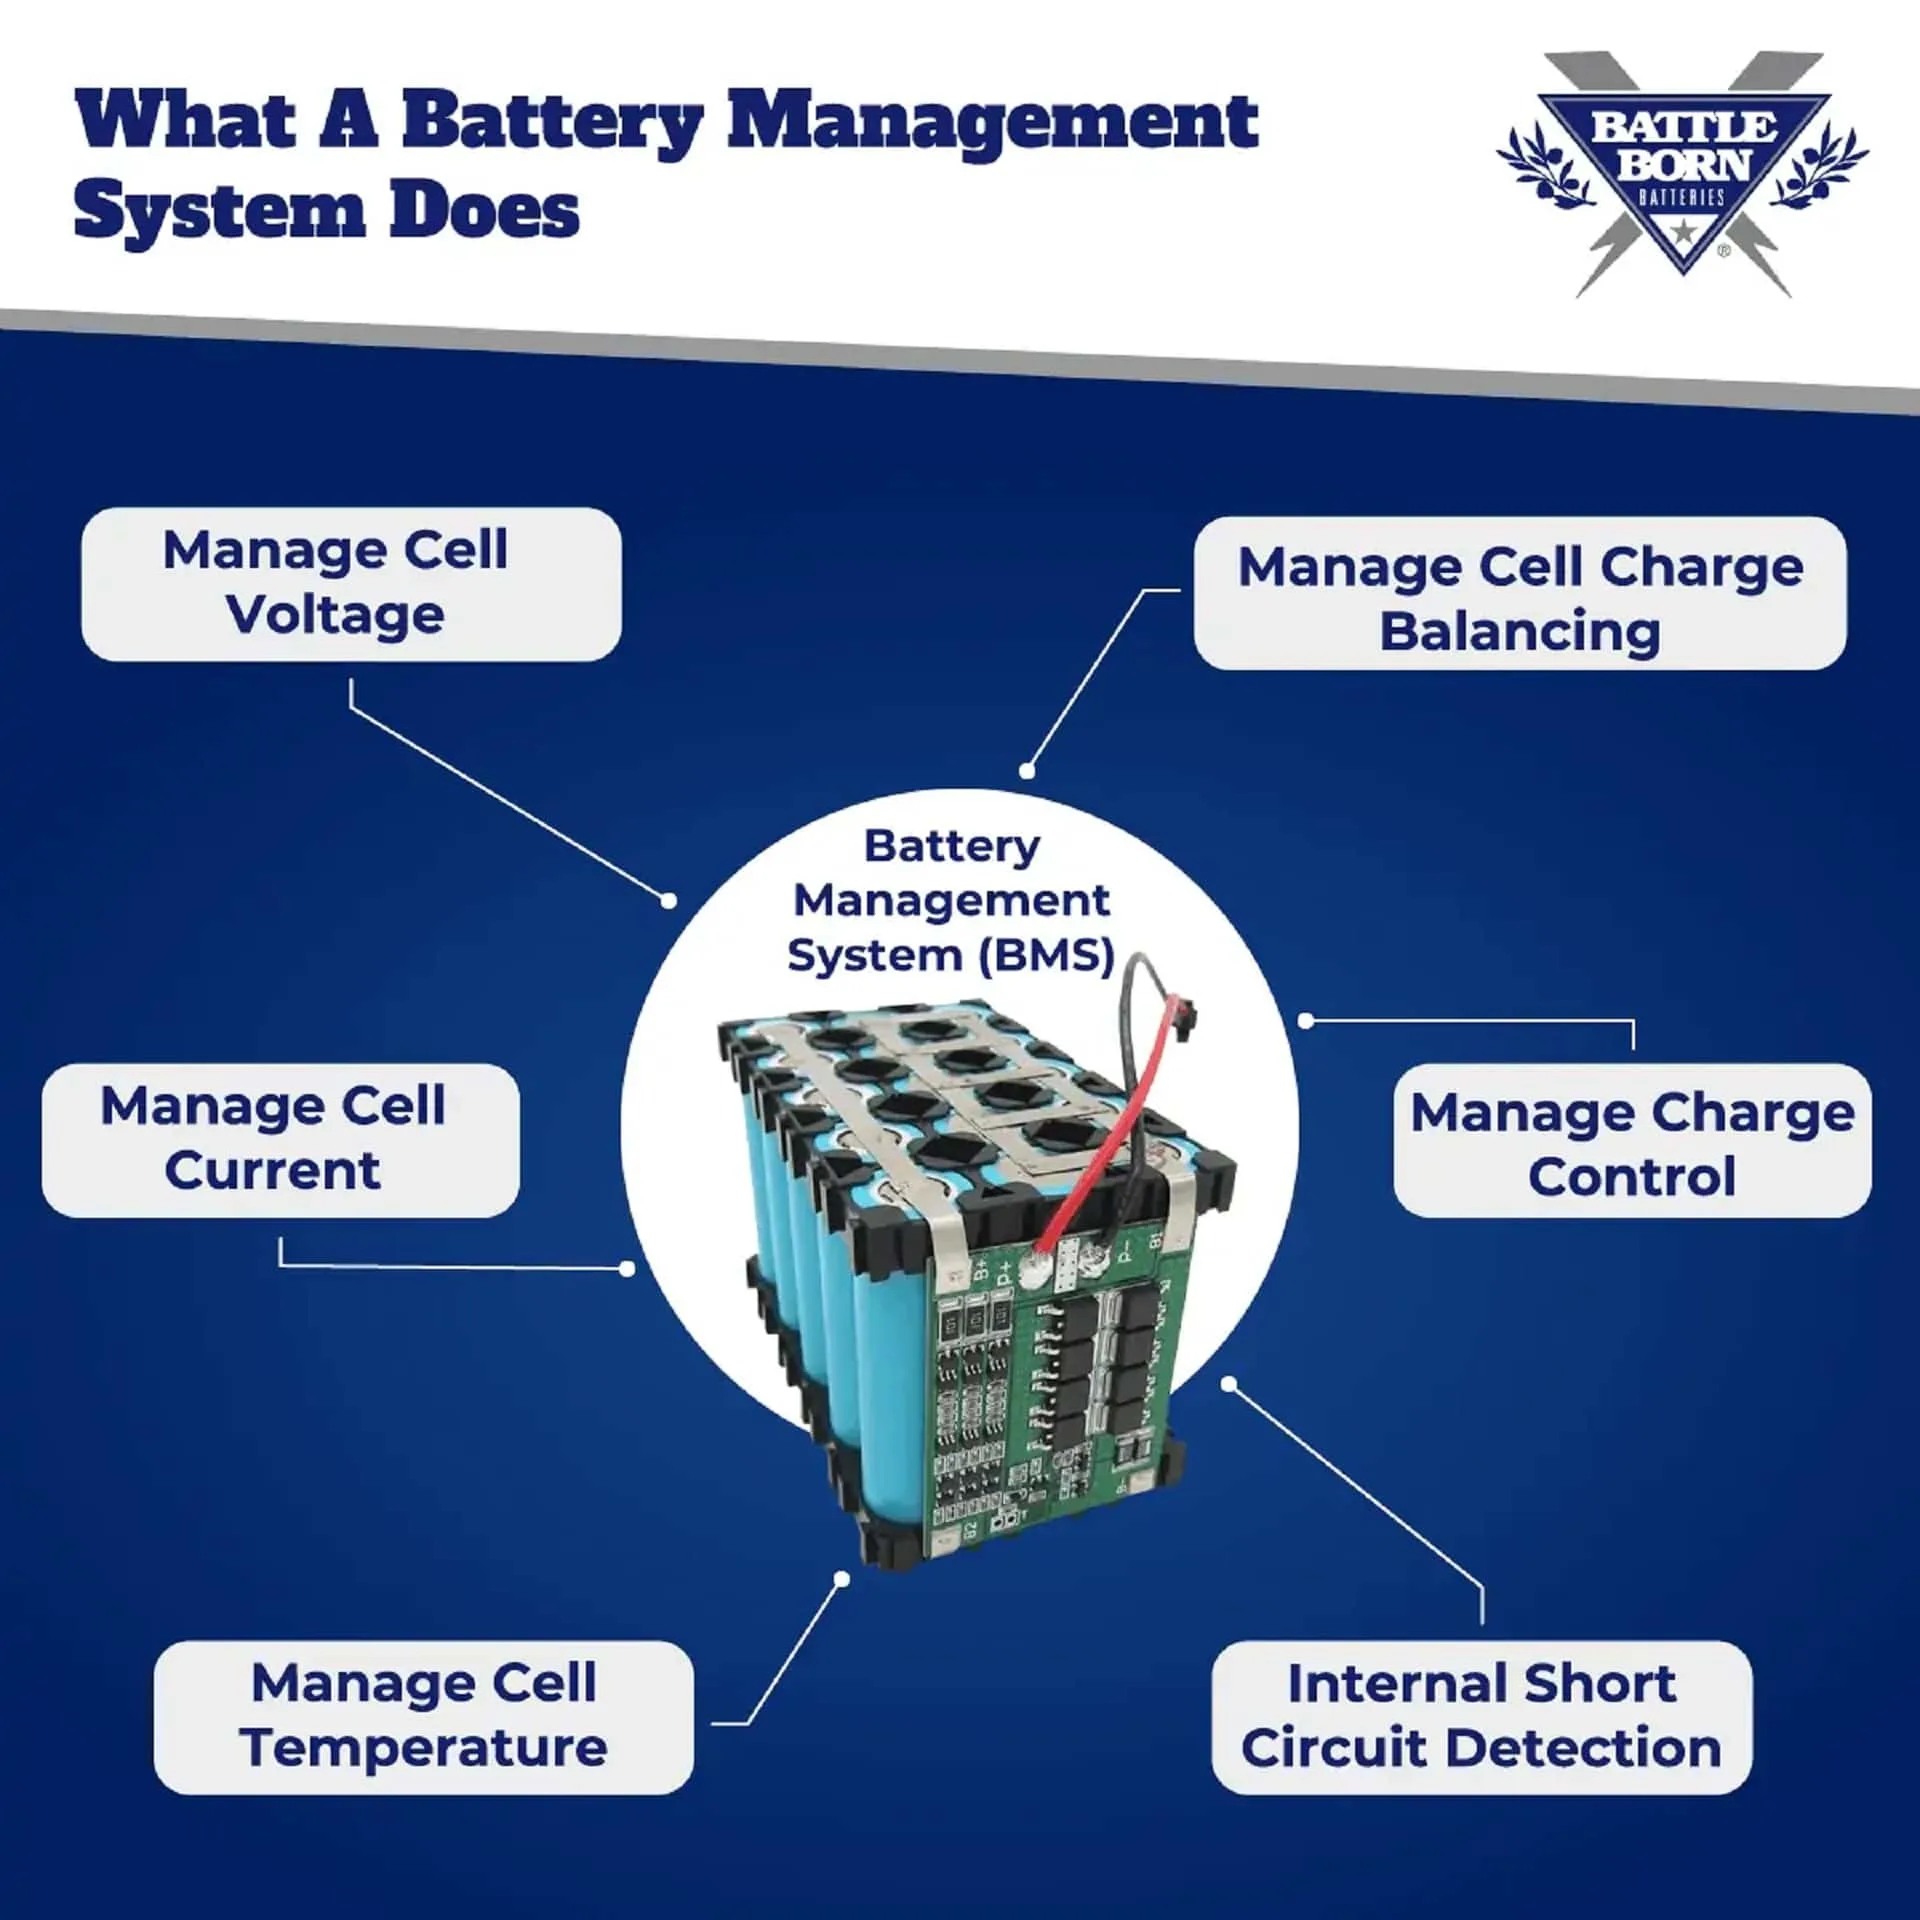 A chart showing an overview of how a battery management system works.